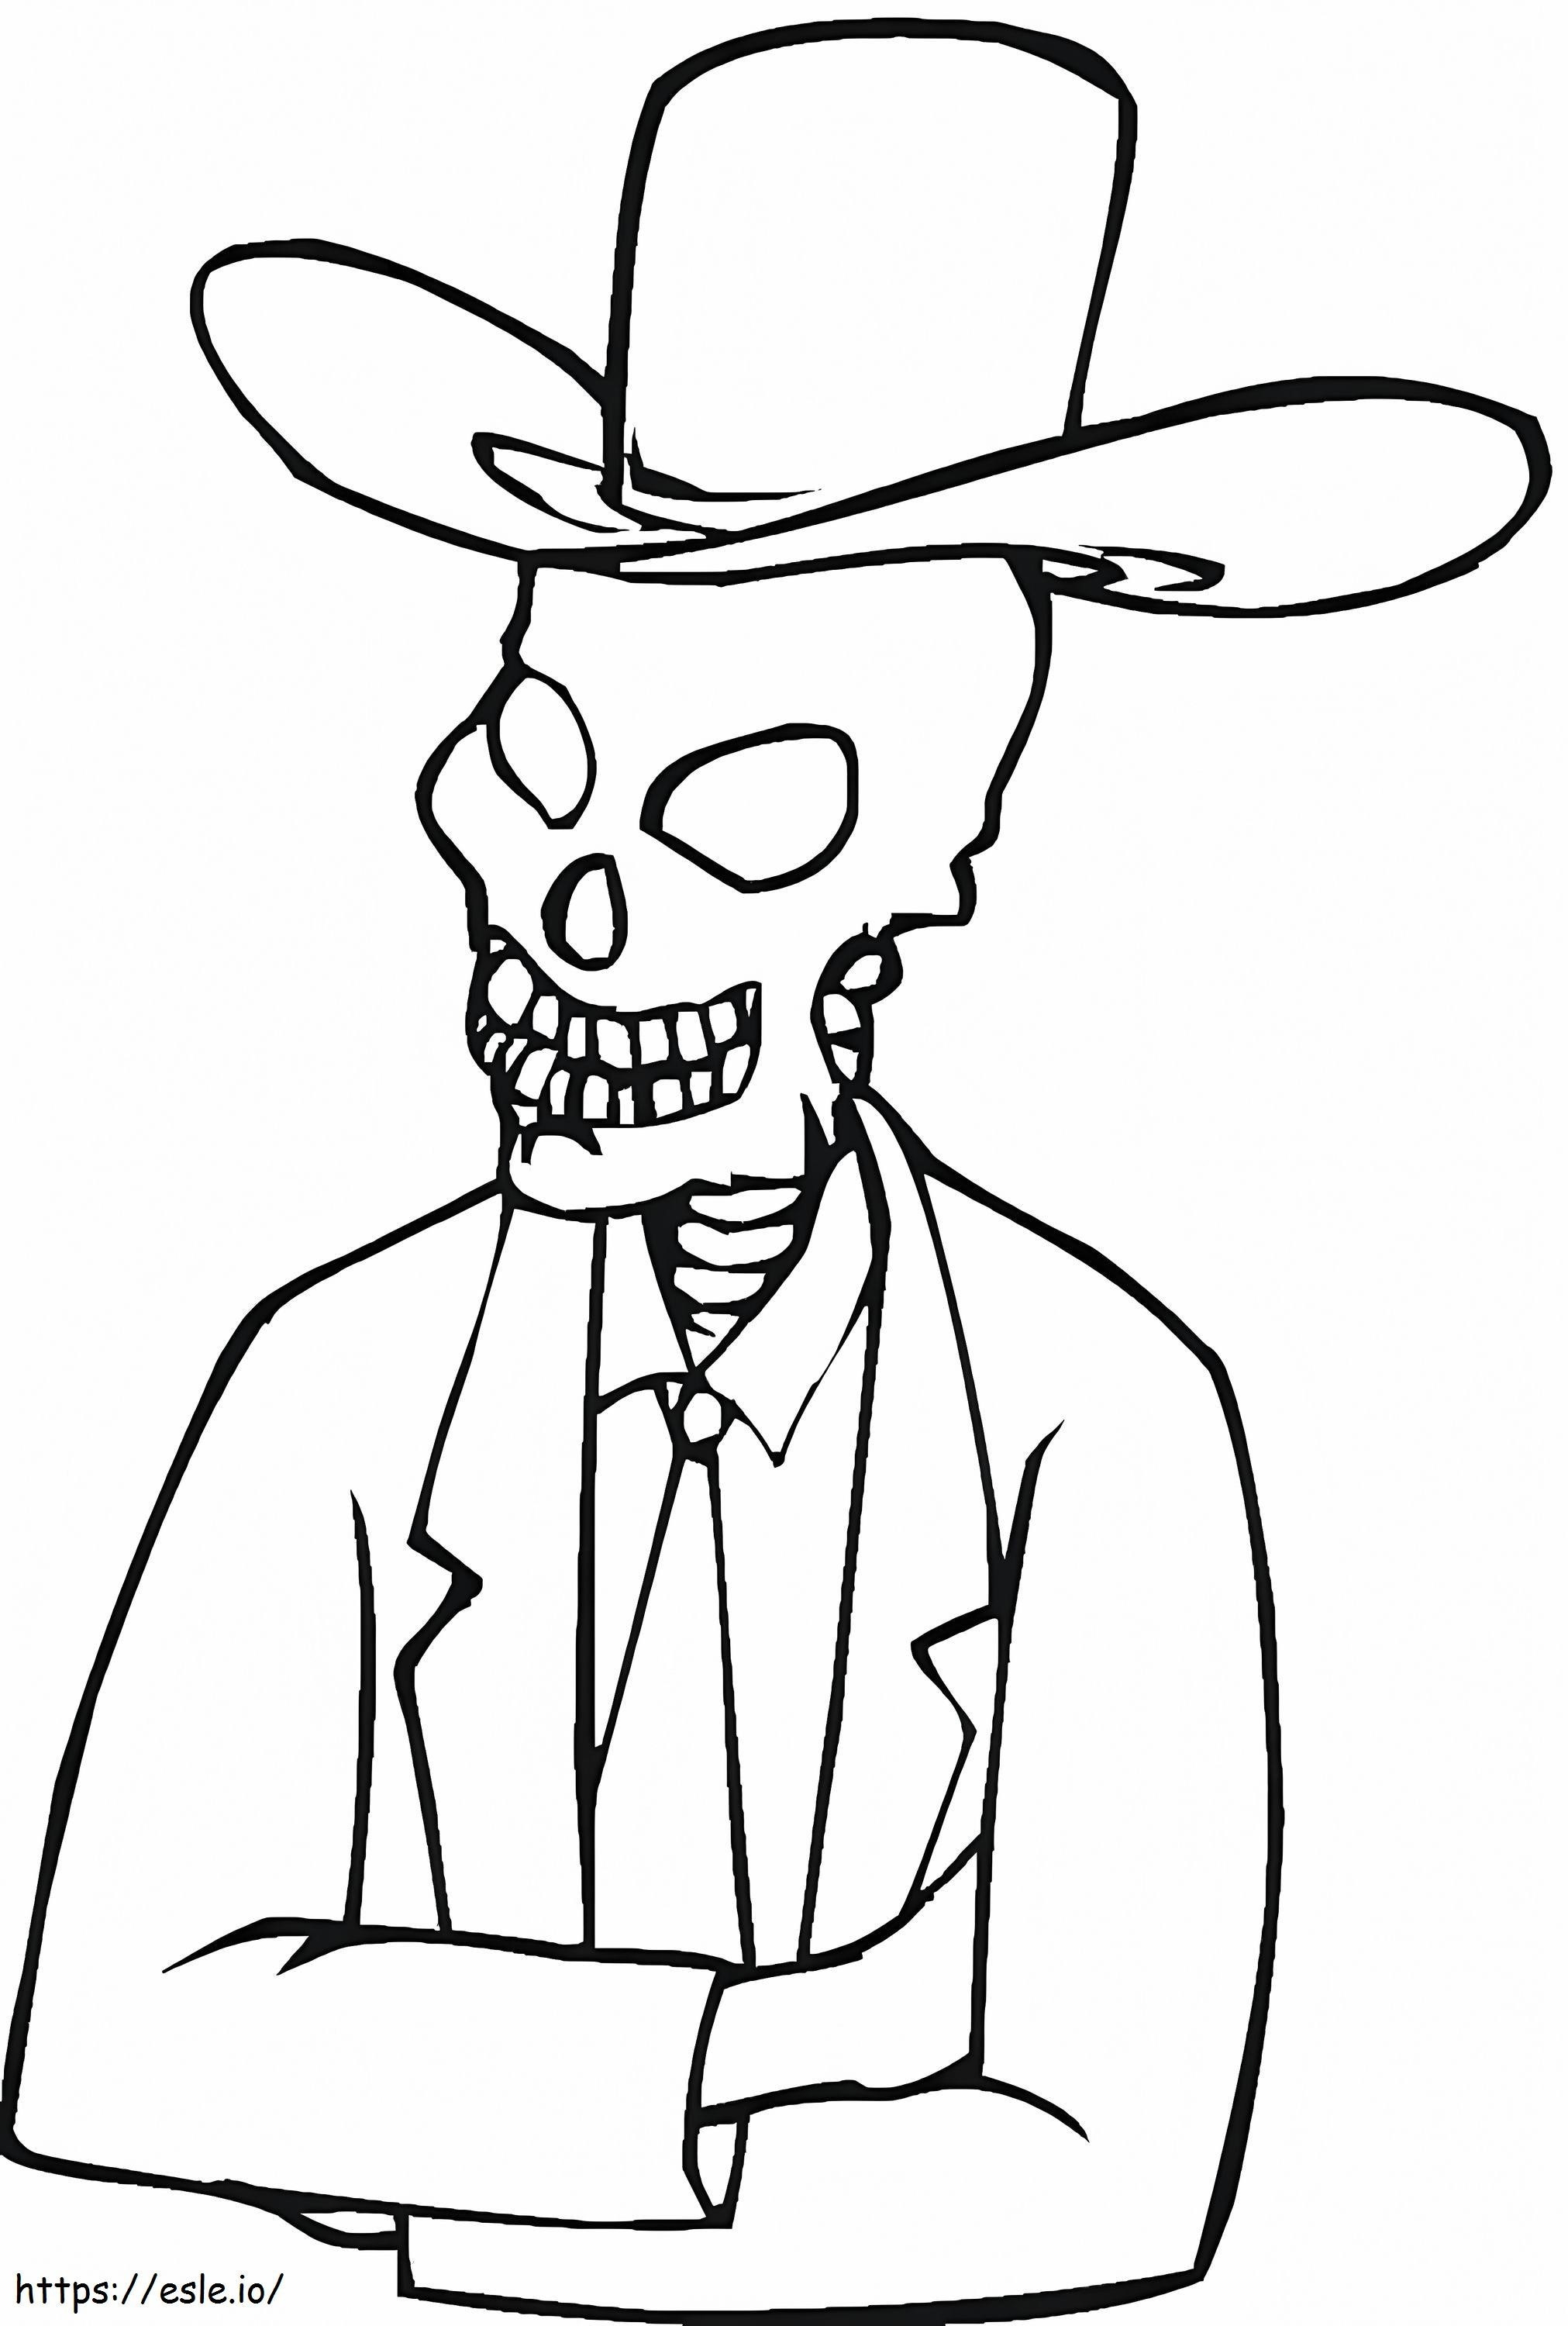 Ghost Skeleton coloring page